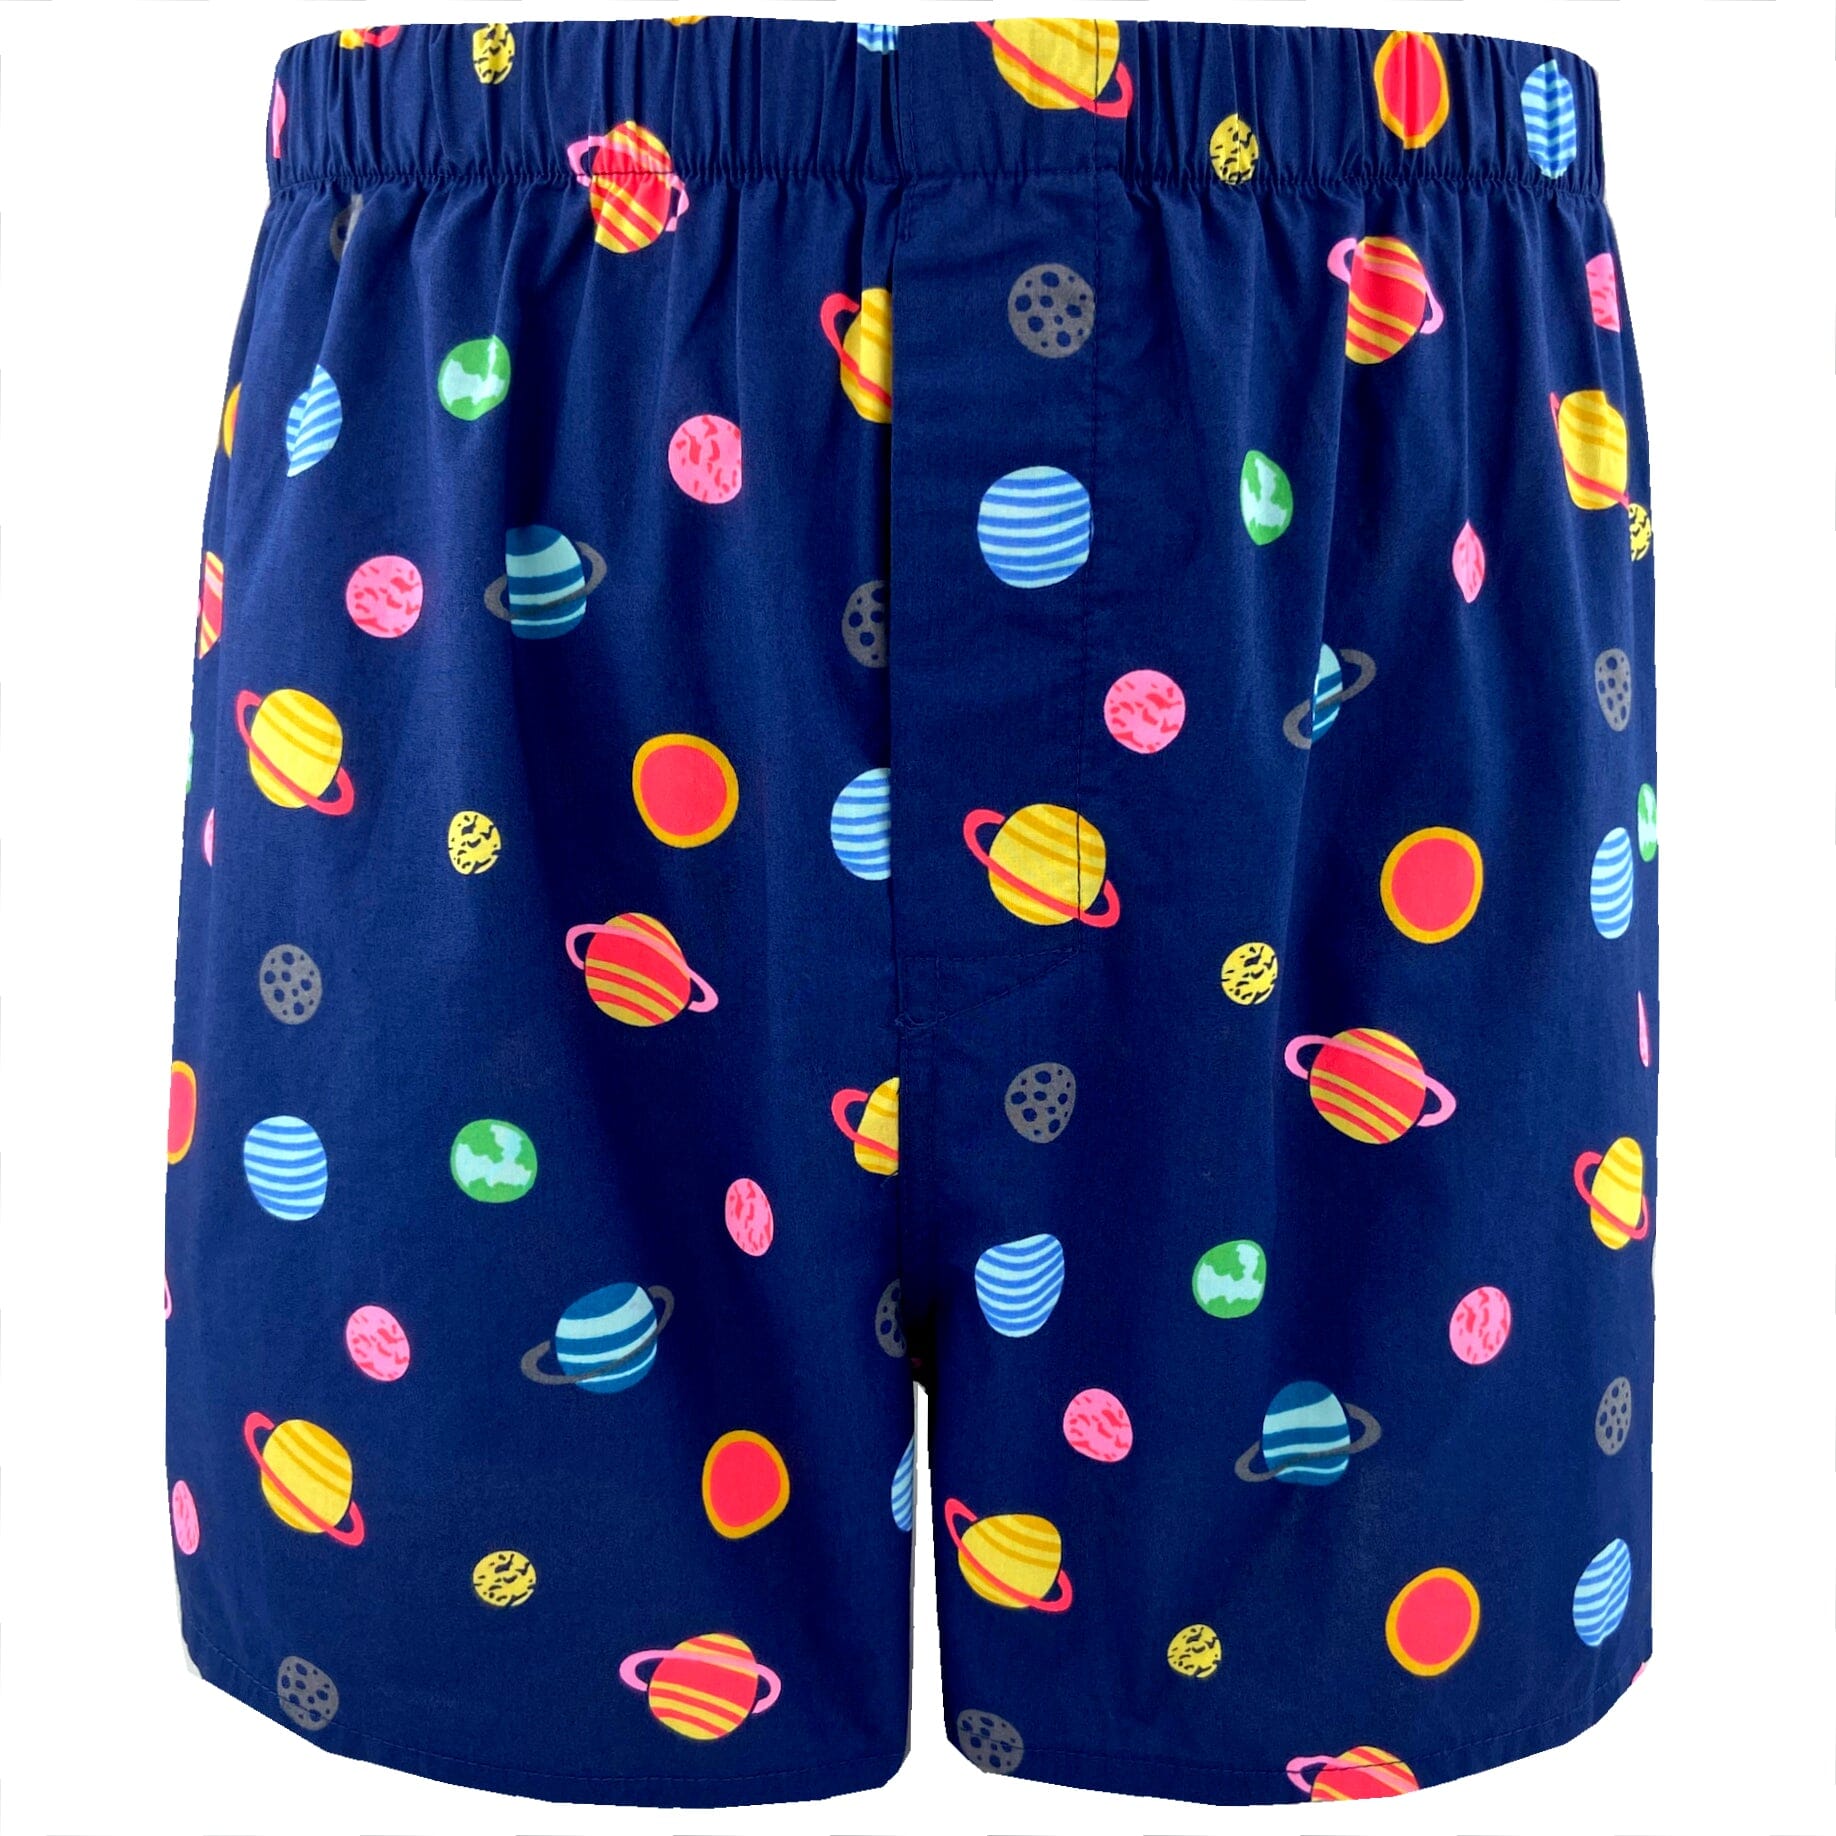 Universe Galaxy Print Boxers For Dudes. Buy Men's Outer Space Boxer Shorts